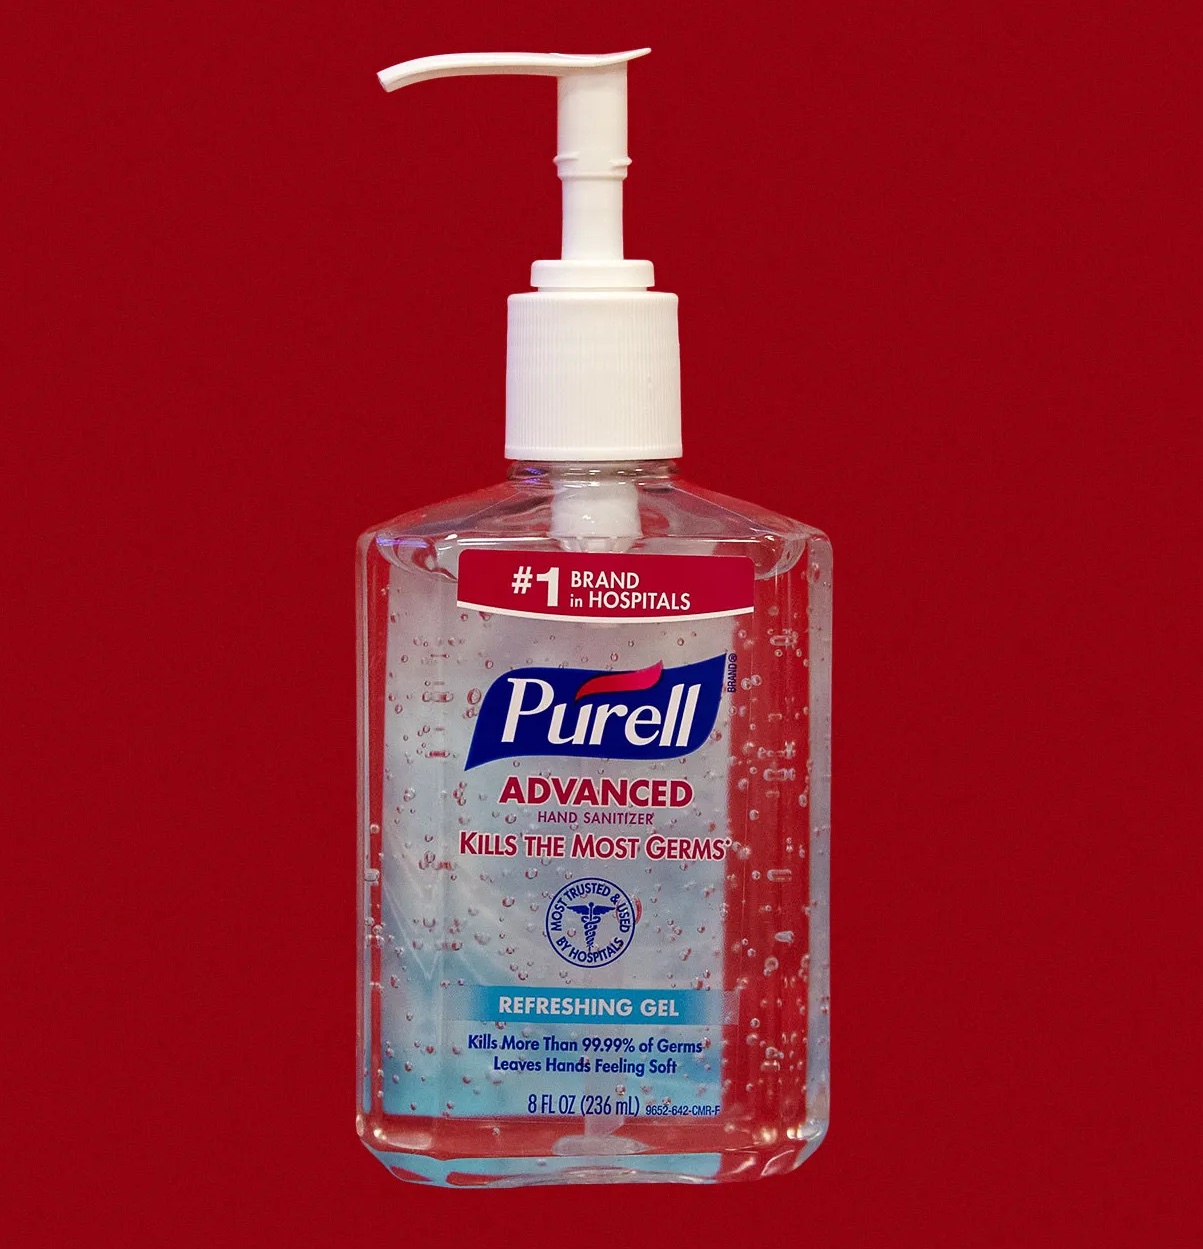 Biggest Mistakes made out of Horniness - hand sanitizer - 0 0 0 No Ark Cd0 0. 102 8 Brand Purell Advanced 90 Hand Sanitizer Kills The Most Germs Trusted in Hospitals 2 Refreshing Gel Kills More Than 99.99% of Germs Leaves Hands Feeling Soft 8 Fl Oz 236 mL